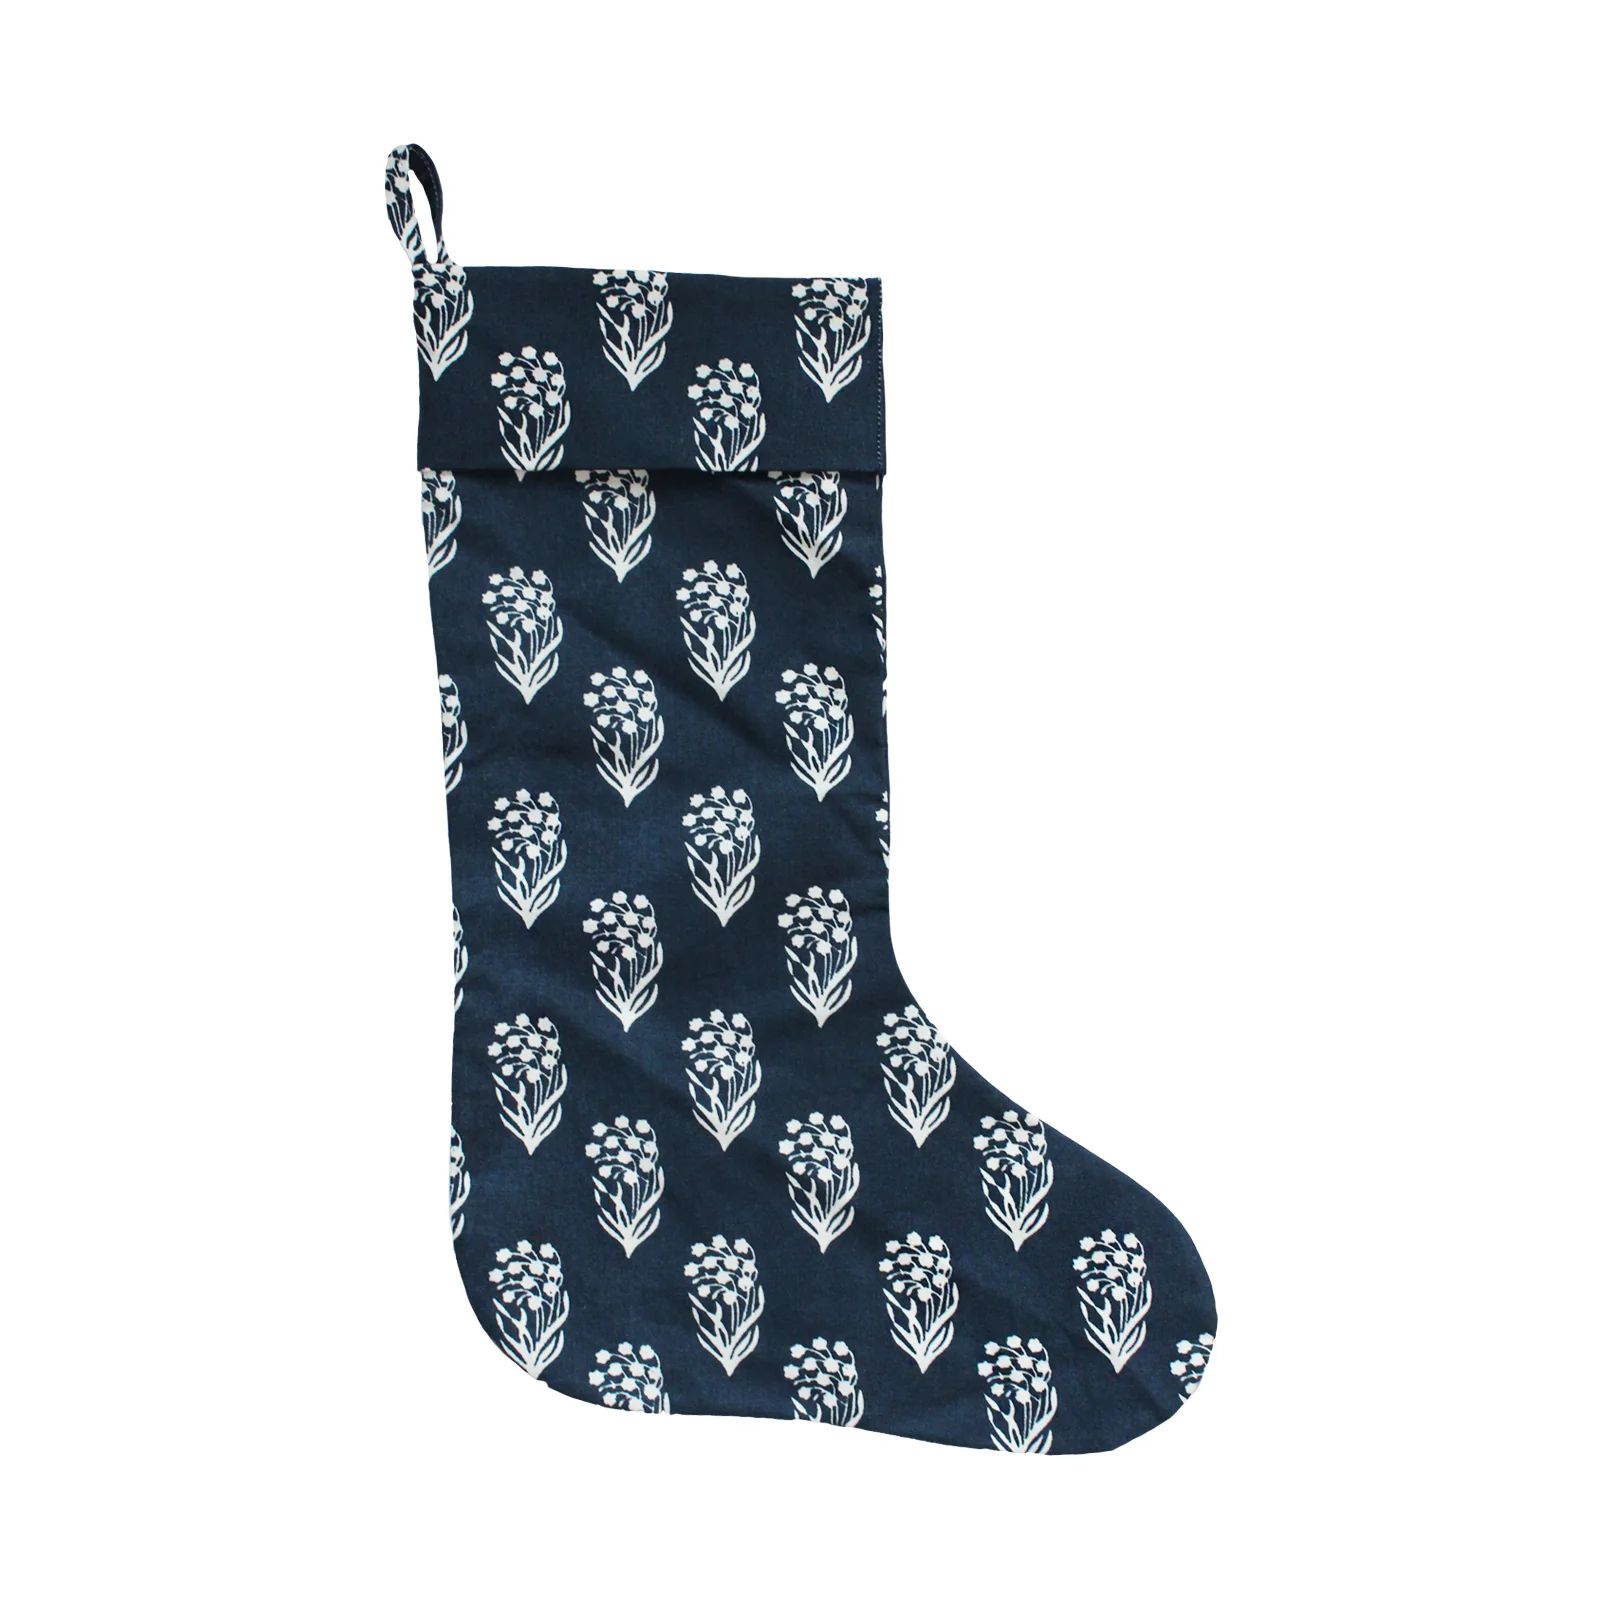 Highland Floral Stocking in Navy | Brooke and Lou